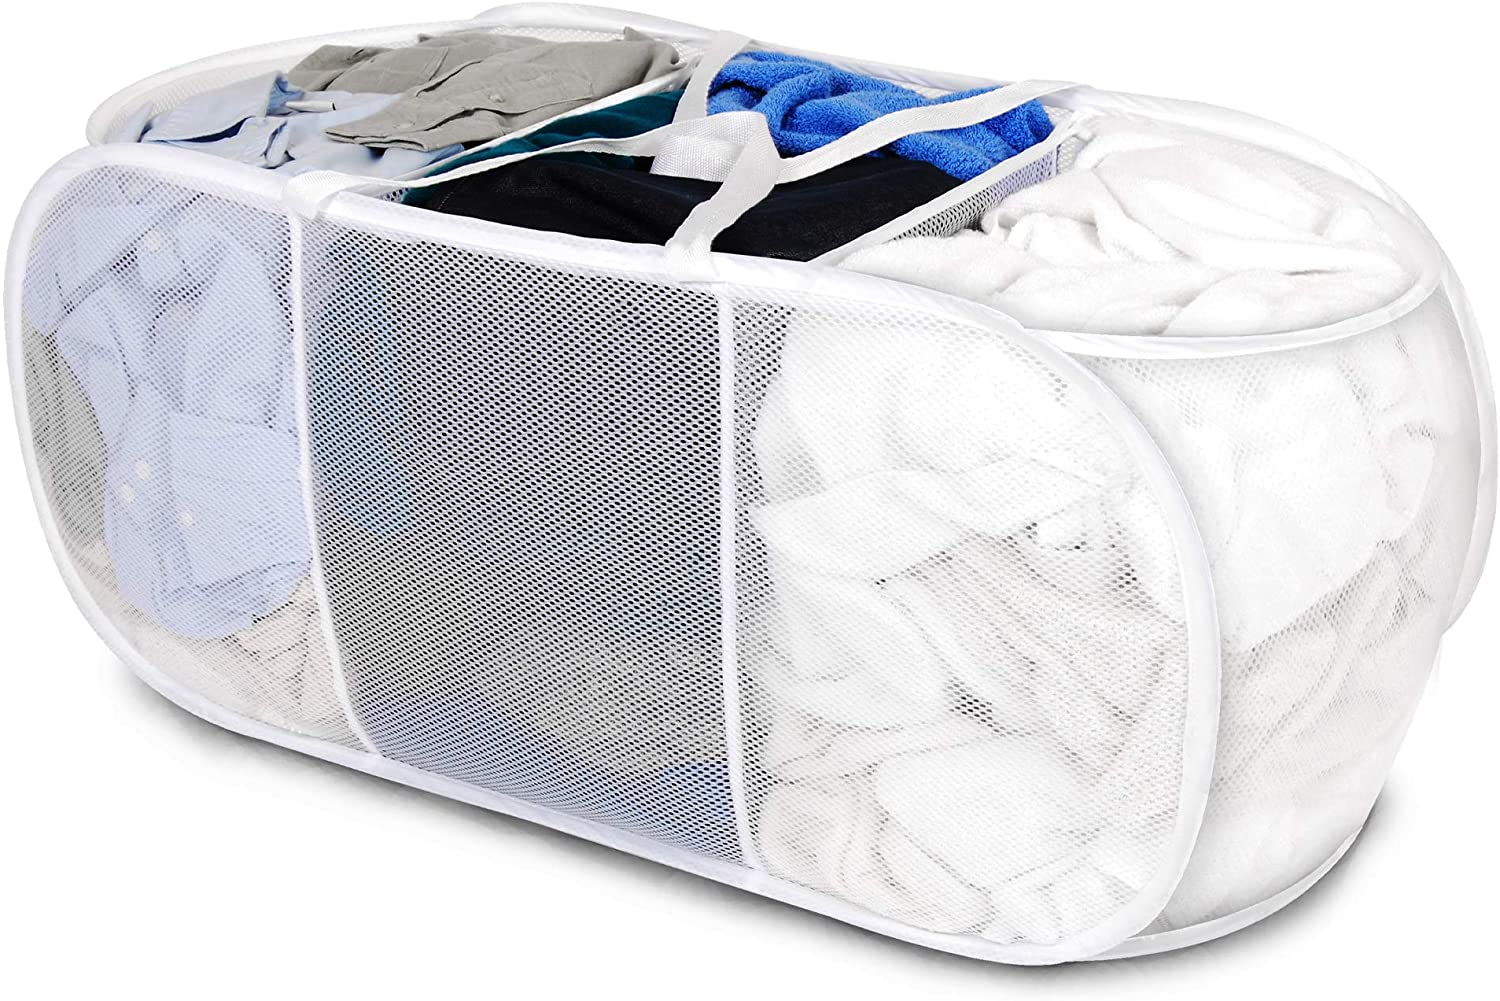 Smart Design Deluxe Mesh Pop Up 3 Compartment Laundry Sorter Hamper Basket - VentilAir Fabric Collapsible Design - for Clothes & Laundry - Home Organization (Holds 6 Loads) (33 x 15 Inch) [White]